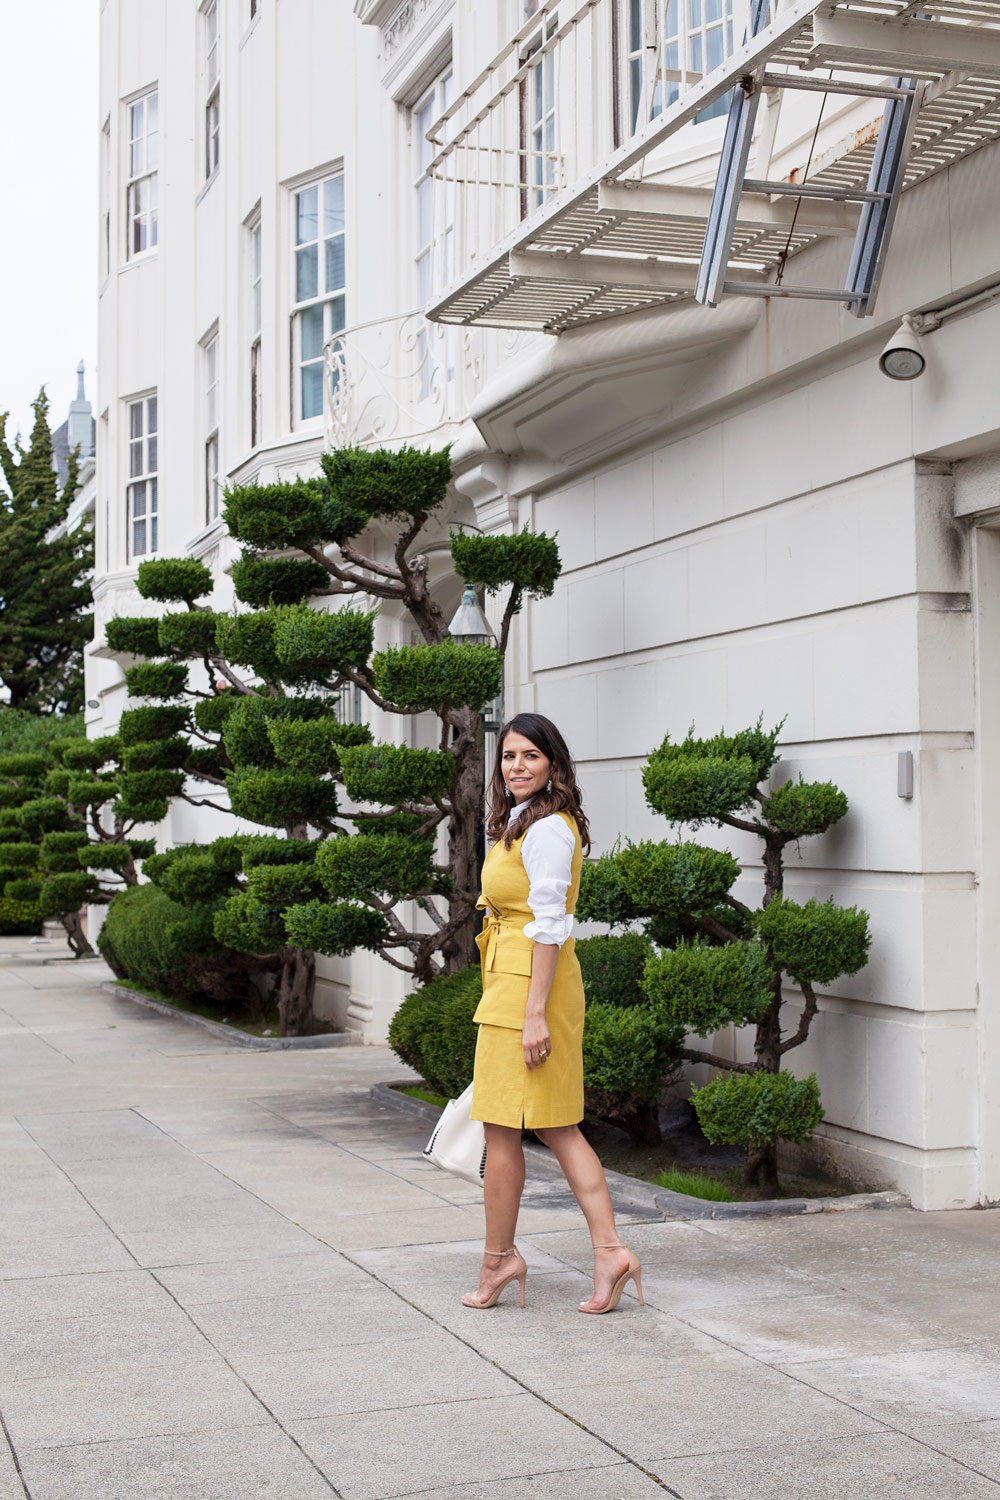 Work Wear Yellow Mustard Wrap Dress Etcetera NYC Spring Looks for Work Corporate Catwalk